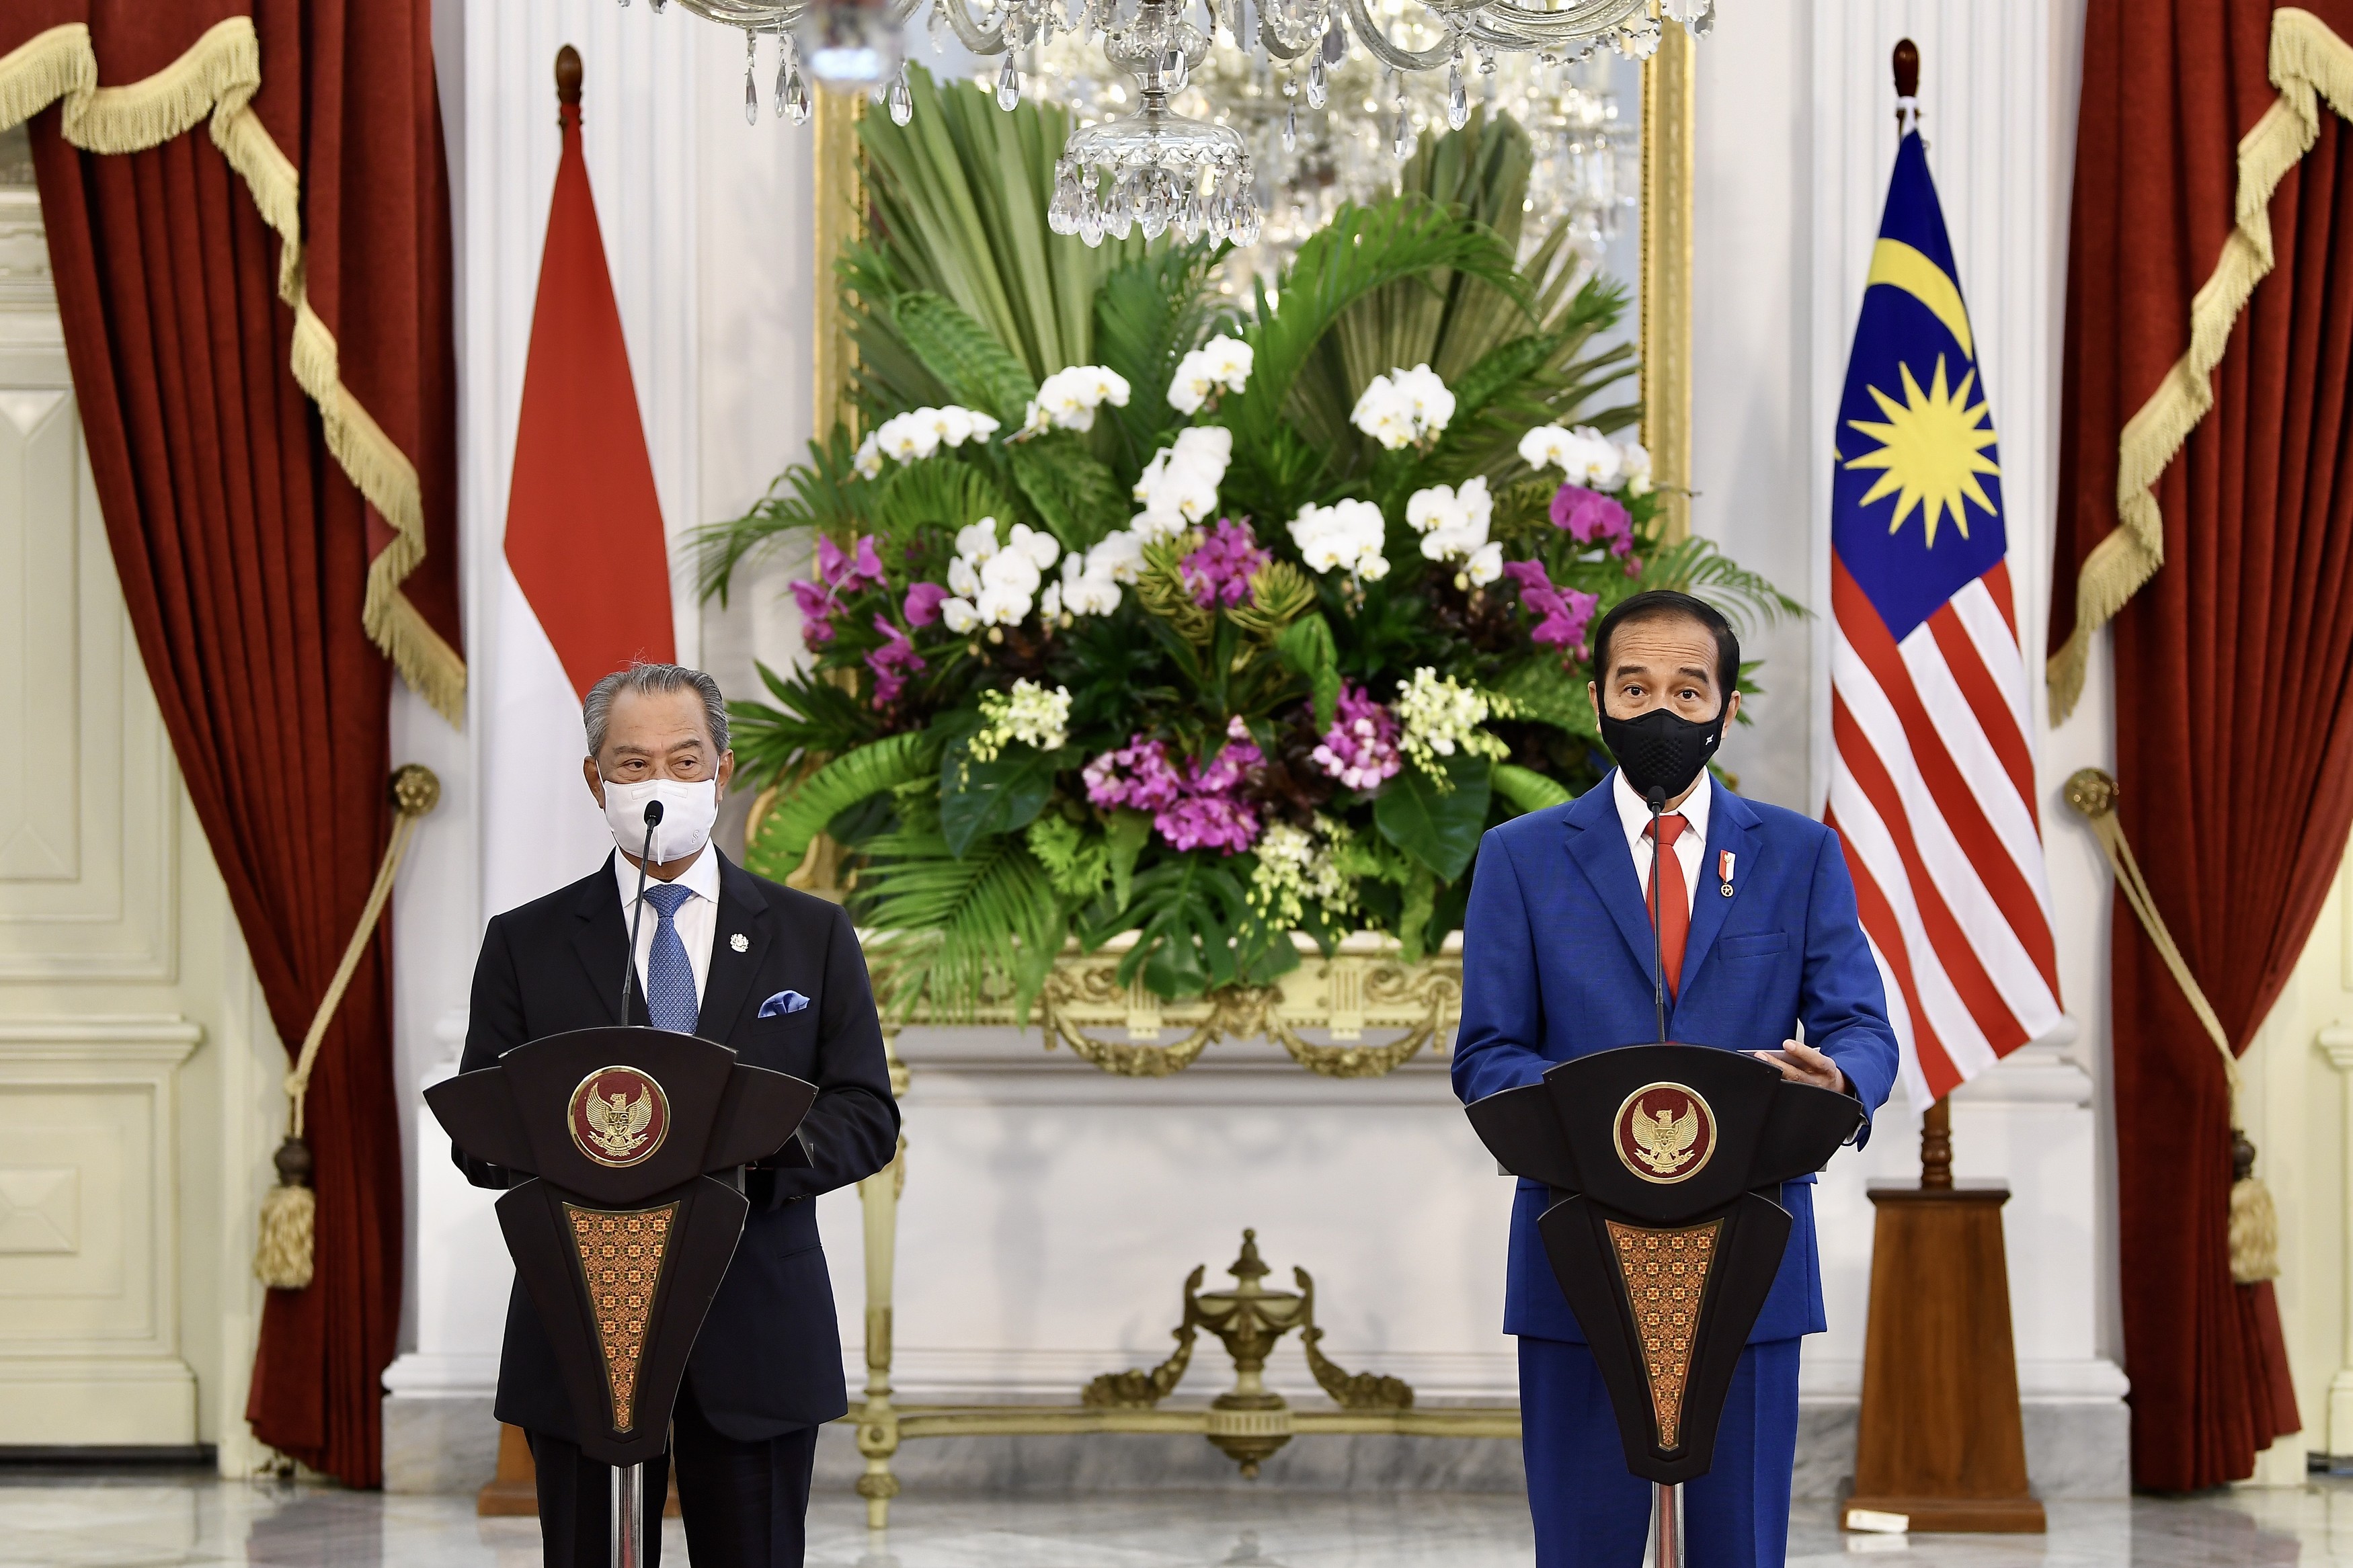 Malaysian PM Describes Official Visit to Indonesia As Very Successful